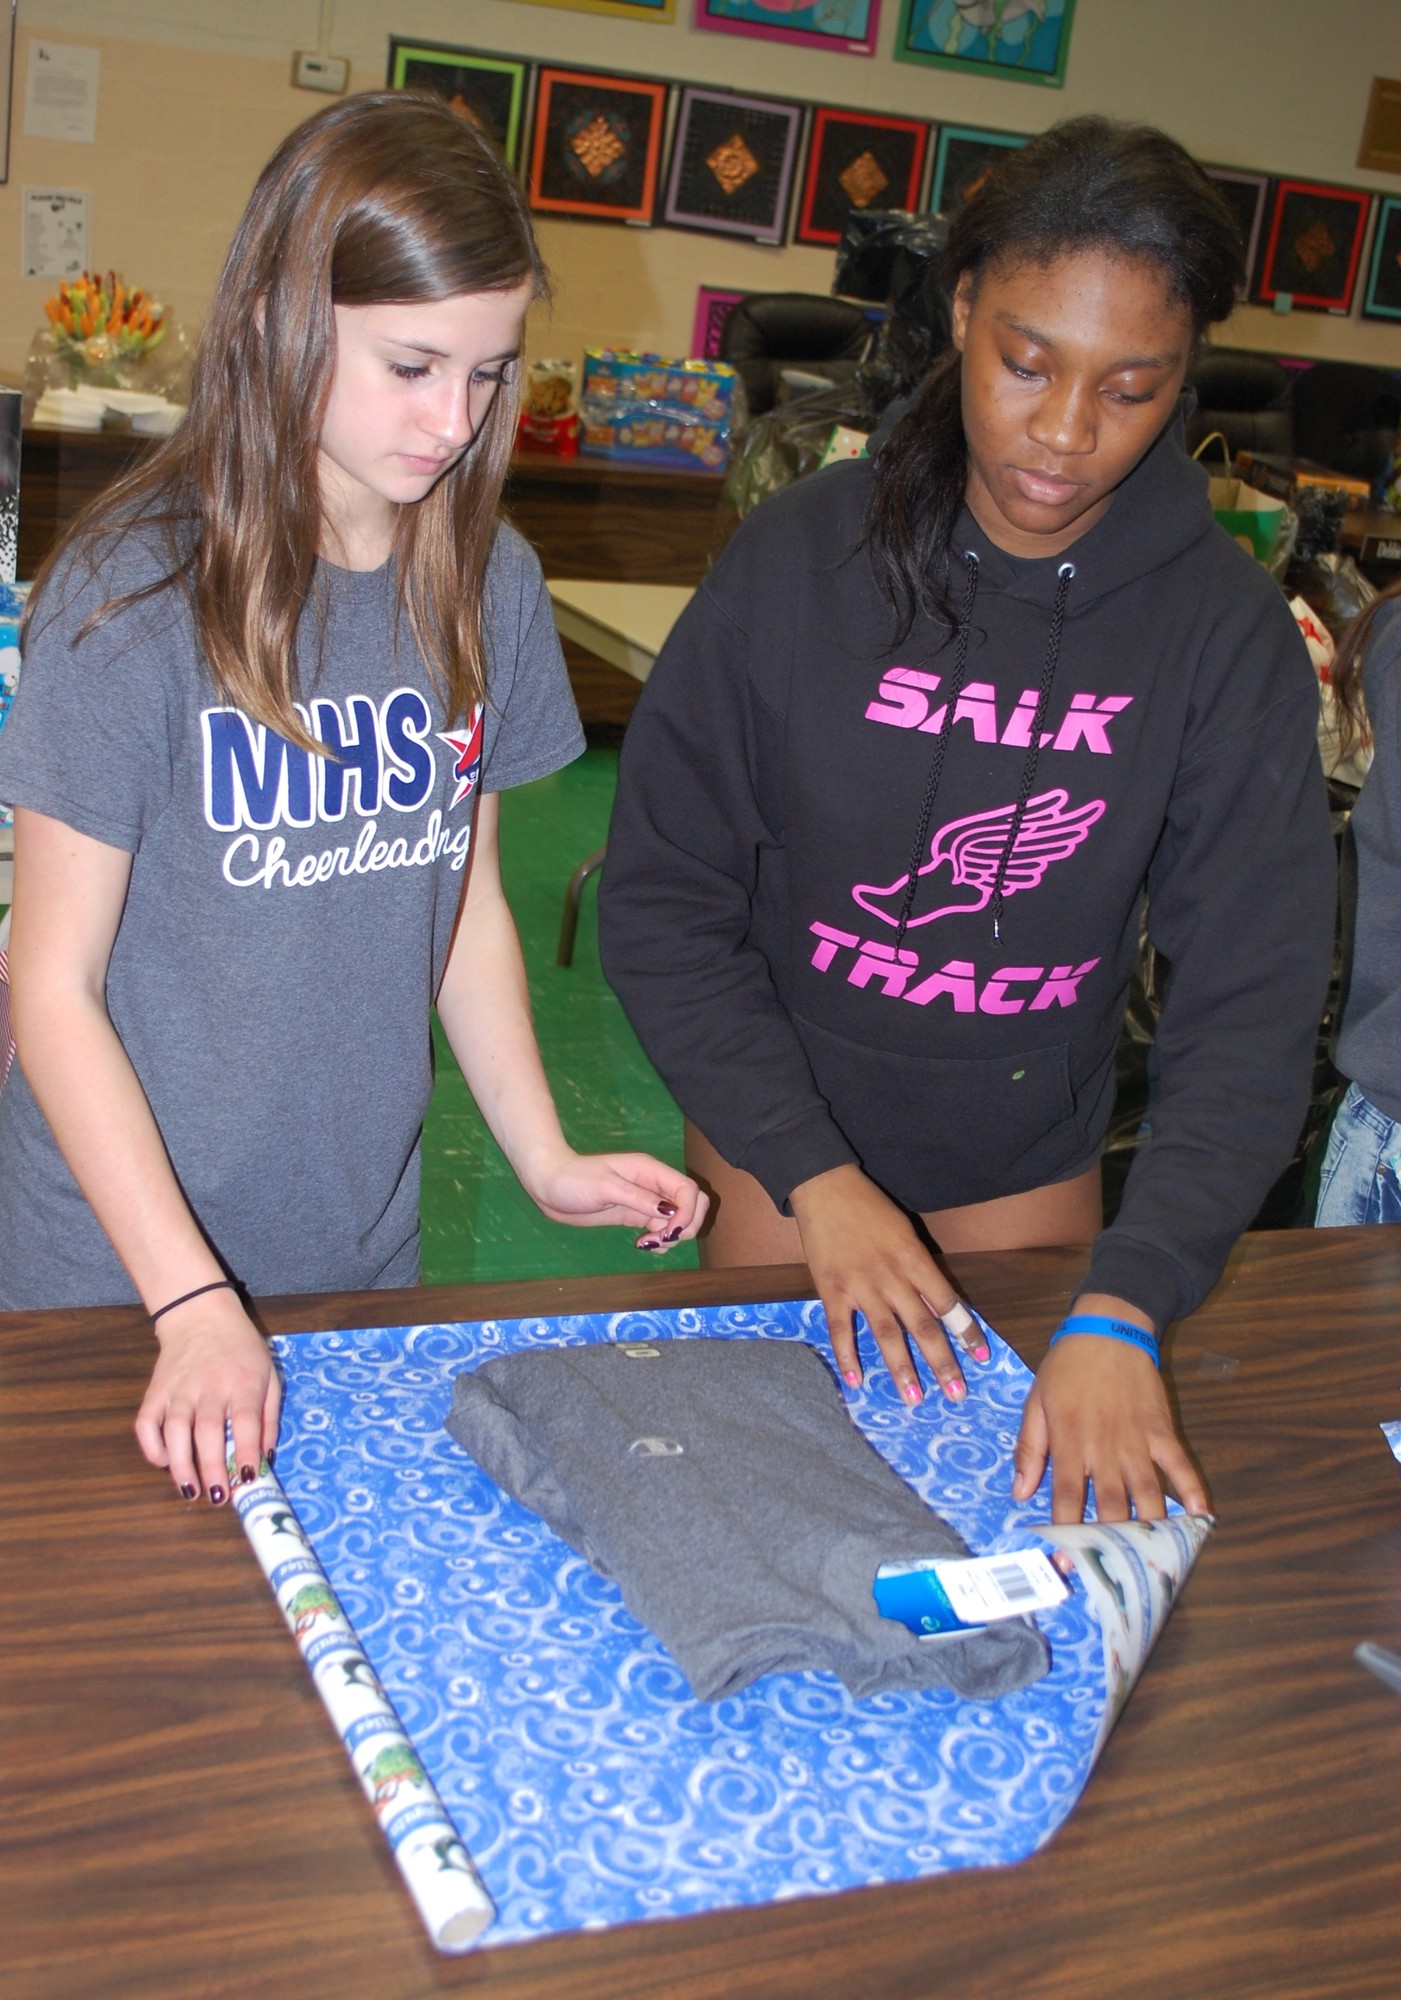 Cheerleaders Cassandra Dolan and Emi Beauliere, both ninth-graders, helped wrap gifts.